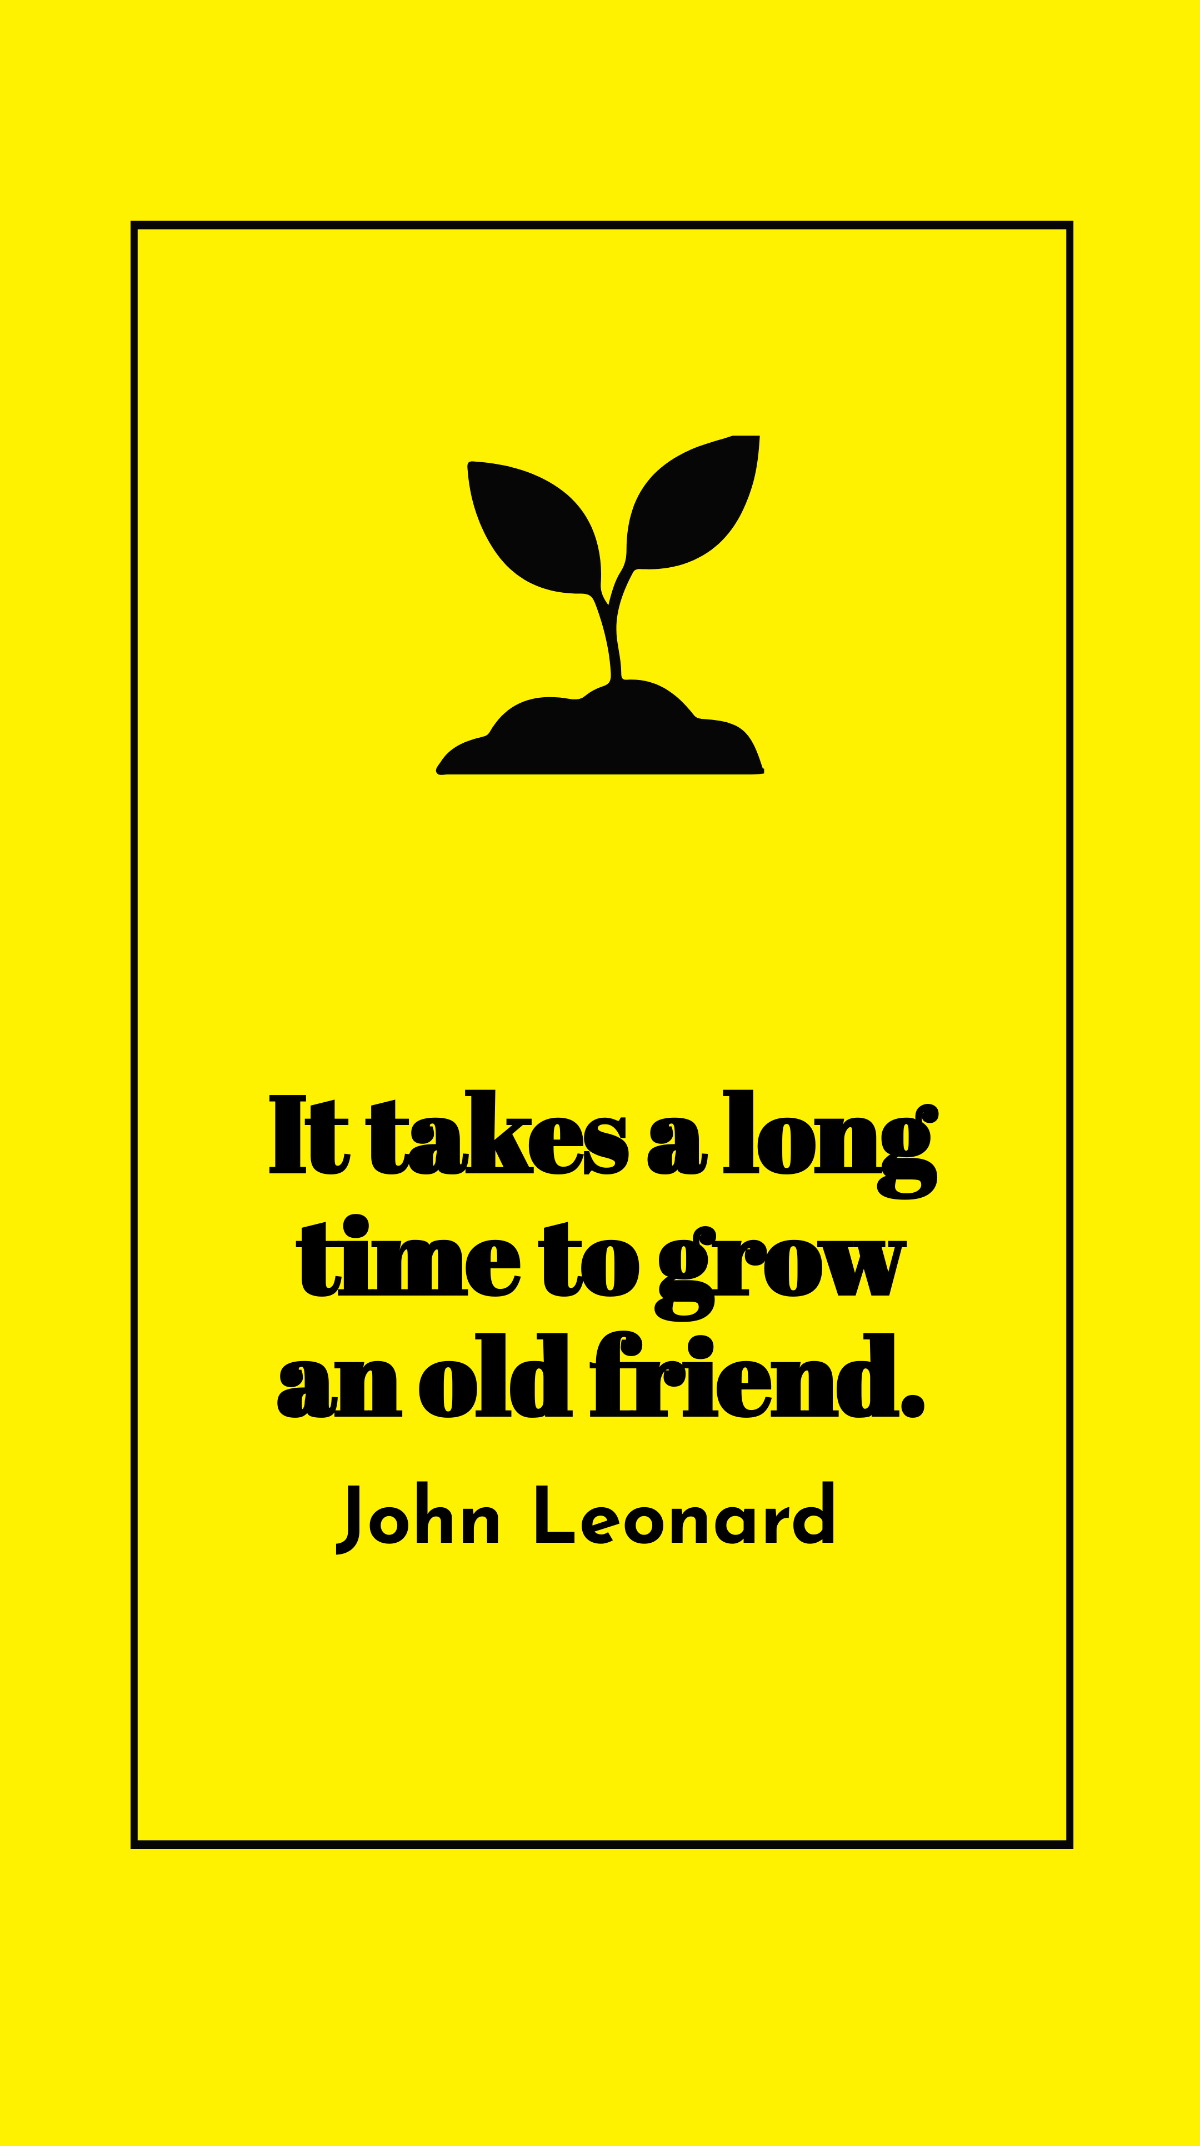 John Leonard - It takes a long time to grow an old friend. Template